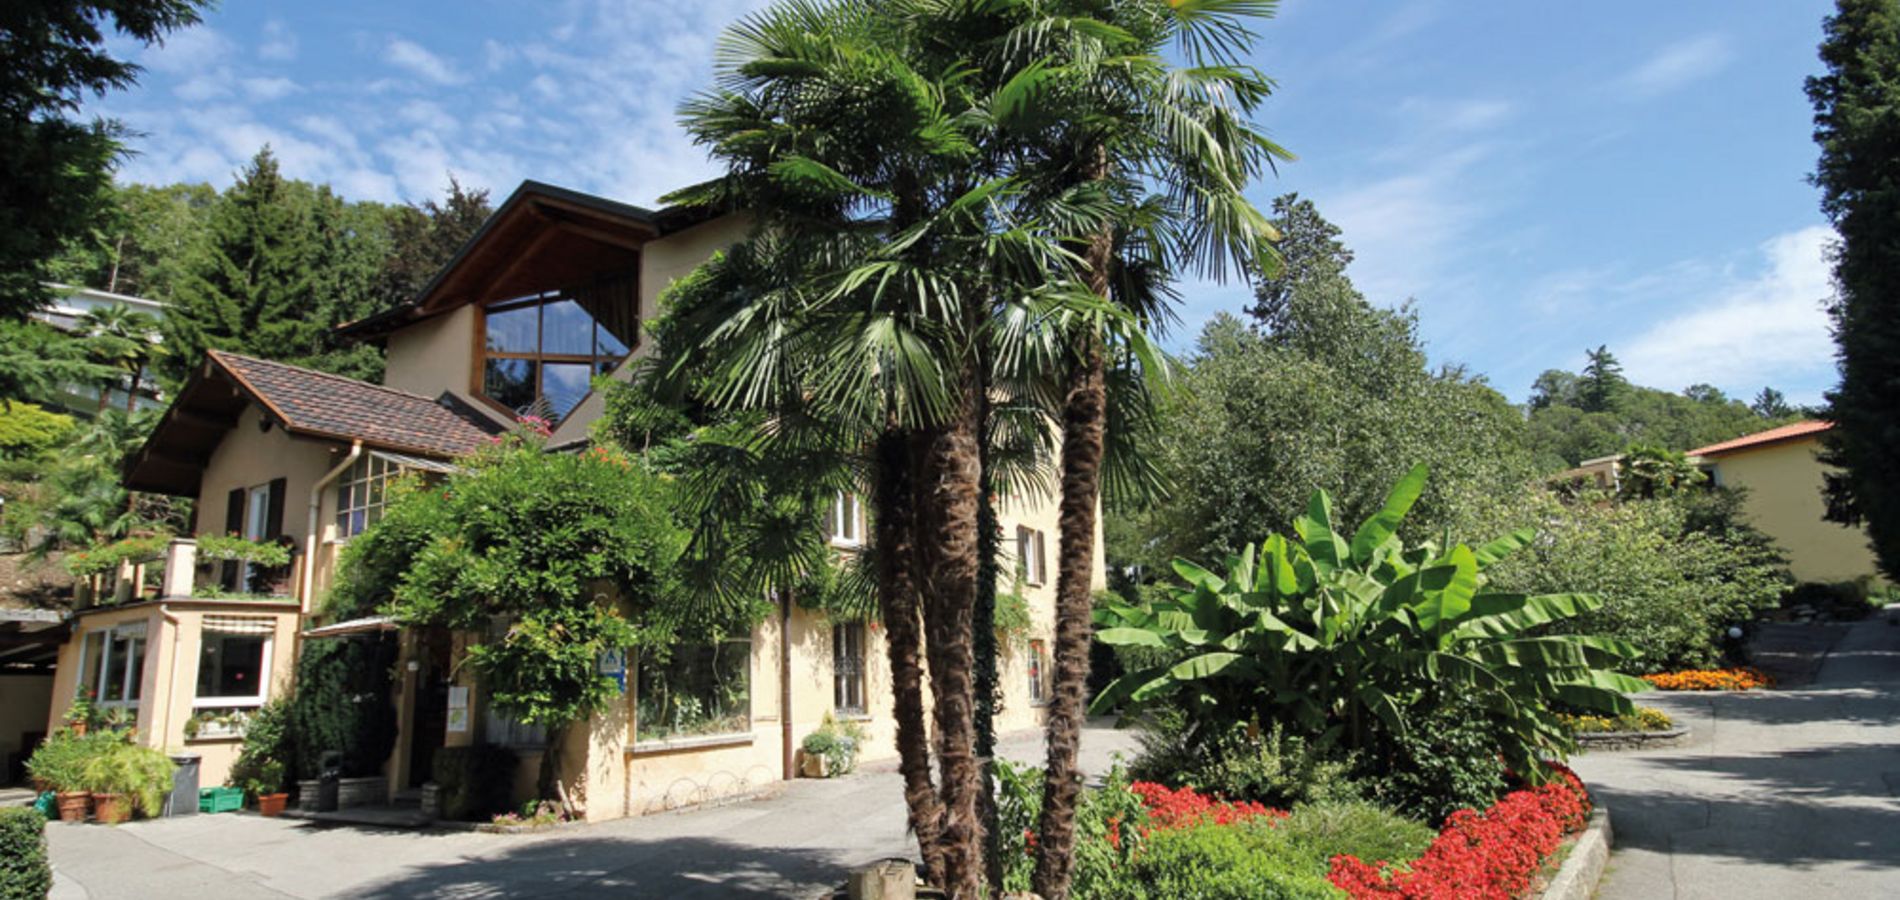 Outside view and house with palm tree Lugano Youth Hostel